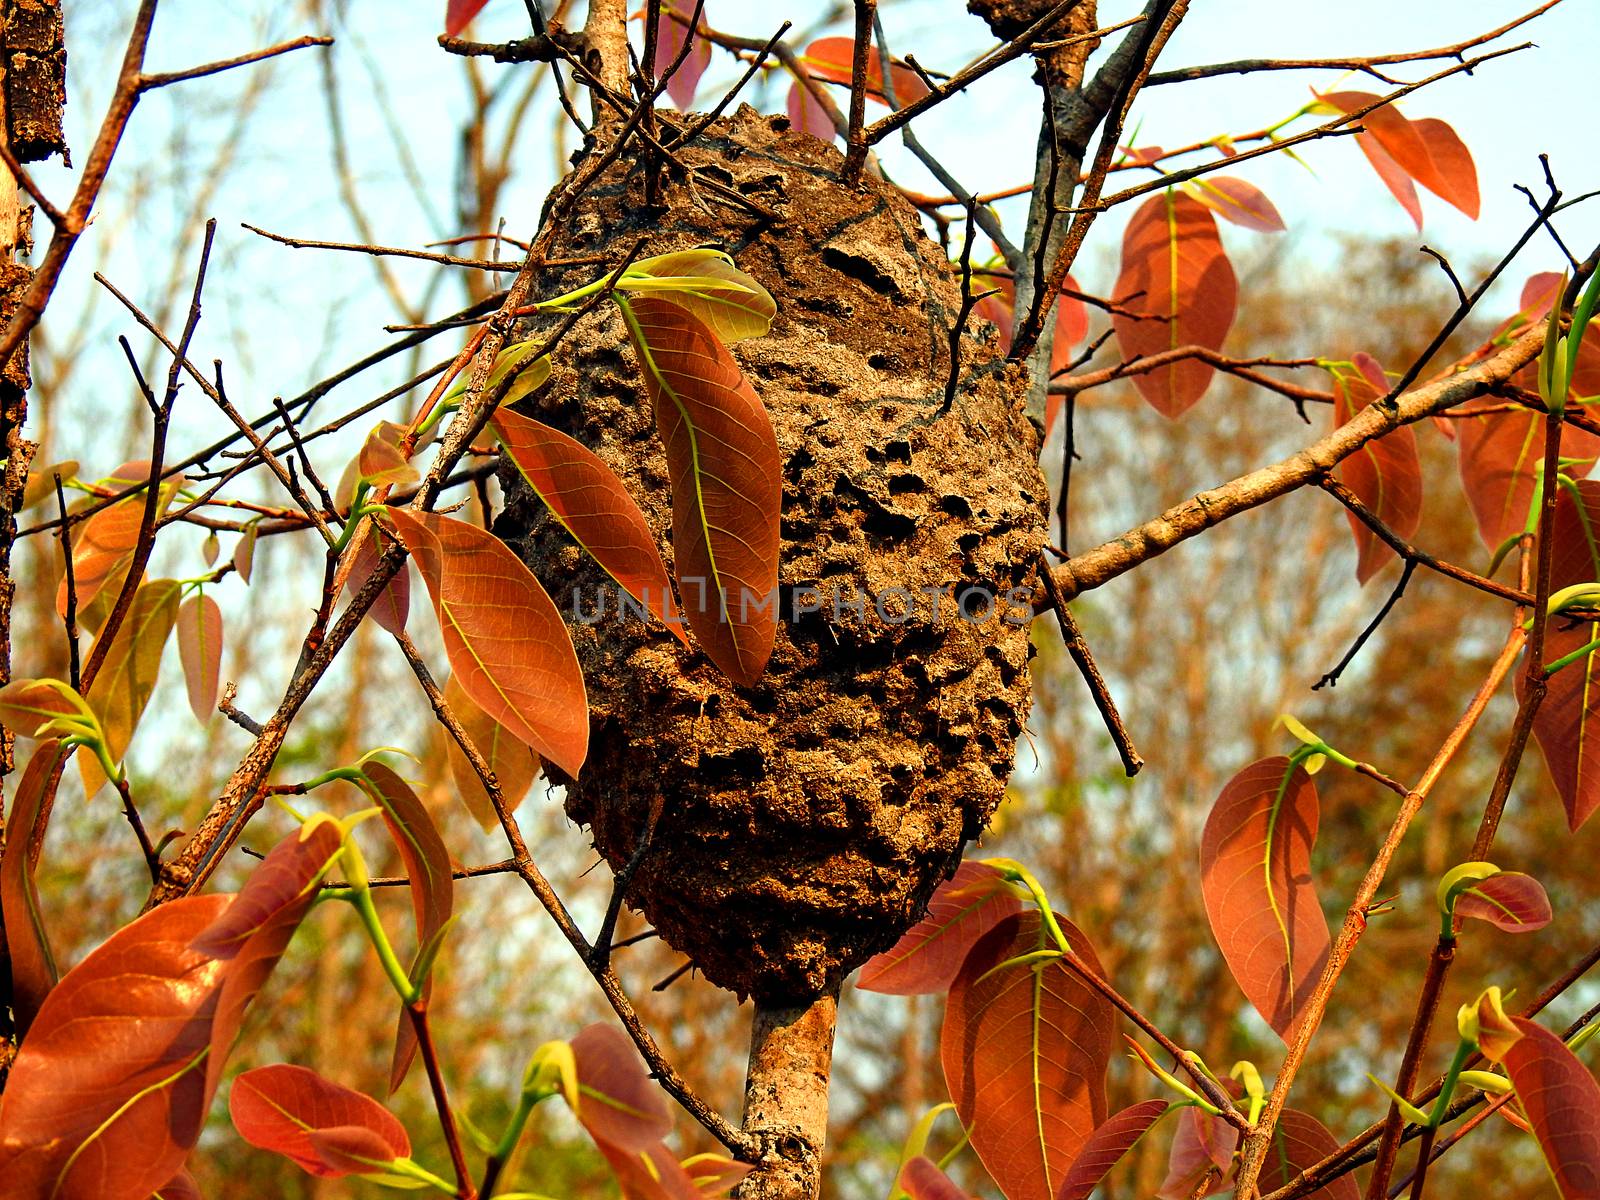 Wasp nest on tree. by oasis502